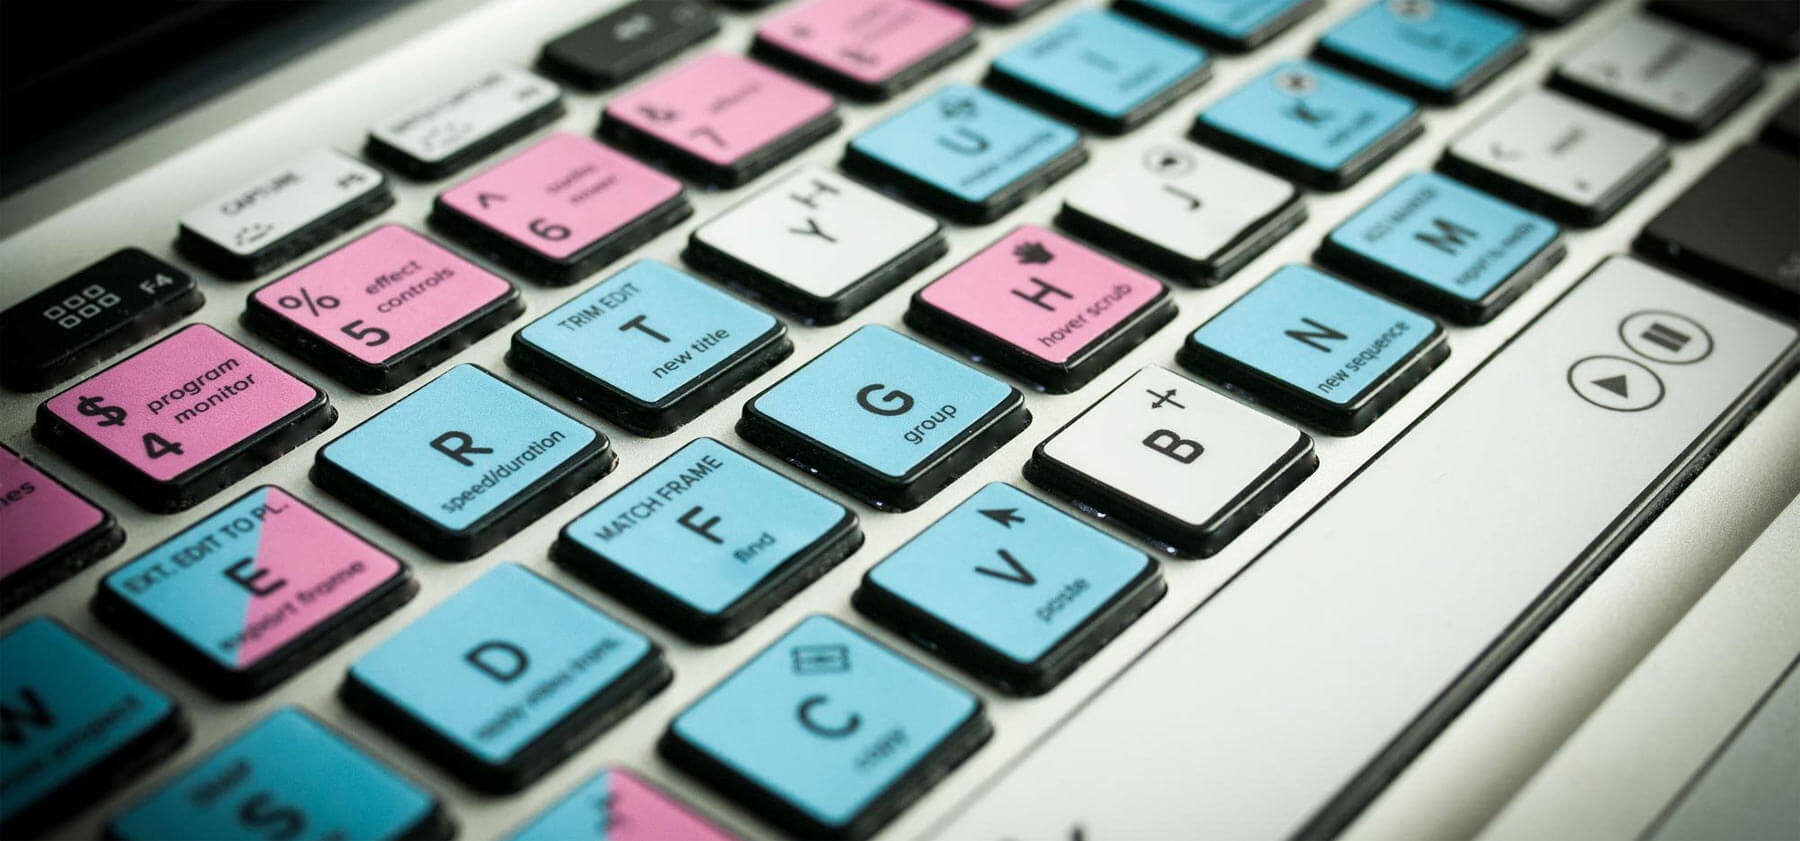 200 Keyboard Shortcuts (Windows) to Boost Your Productivity